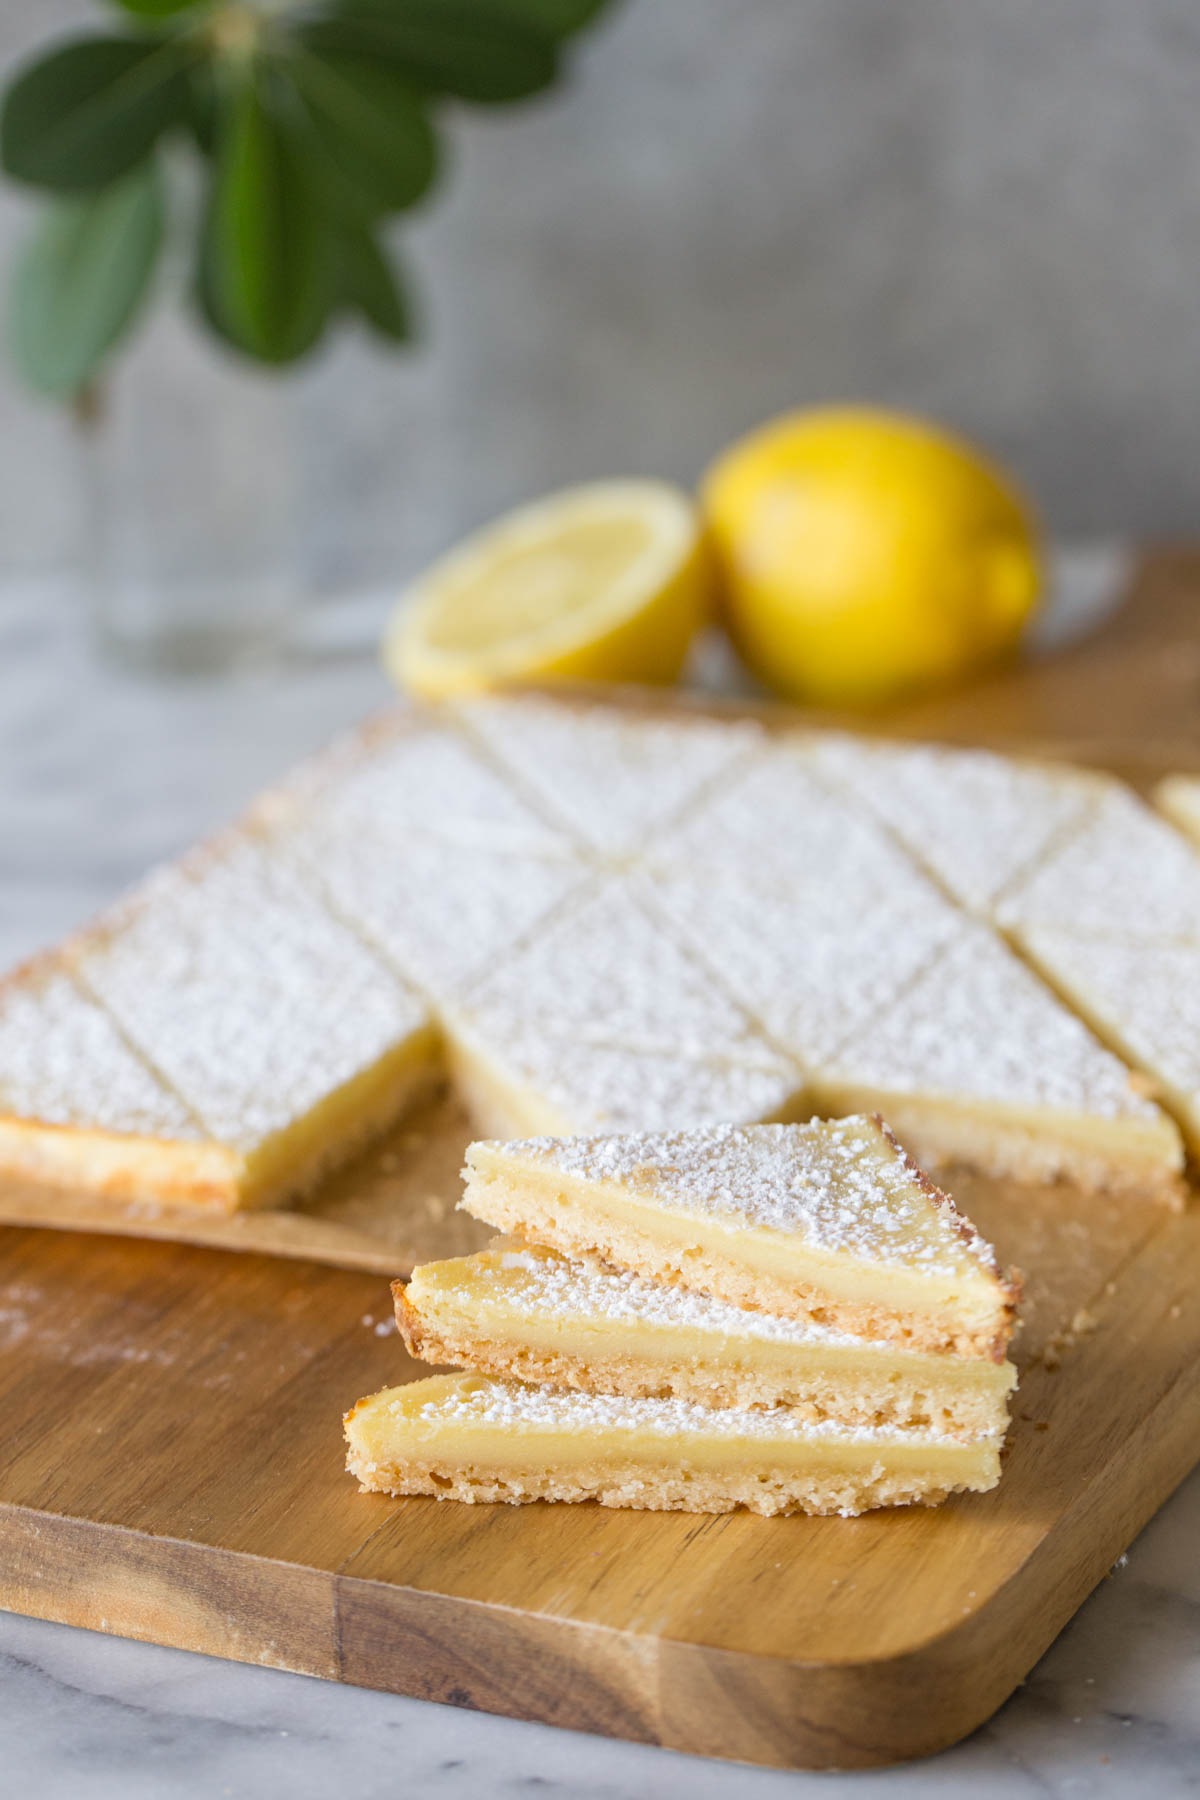 Three Swedish Lemon Bars stacked on a wooden cutting board, with more bars and lemons in the background.  